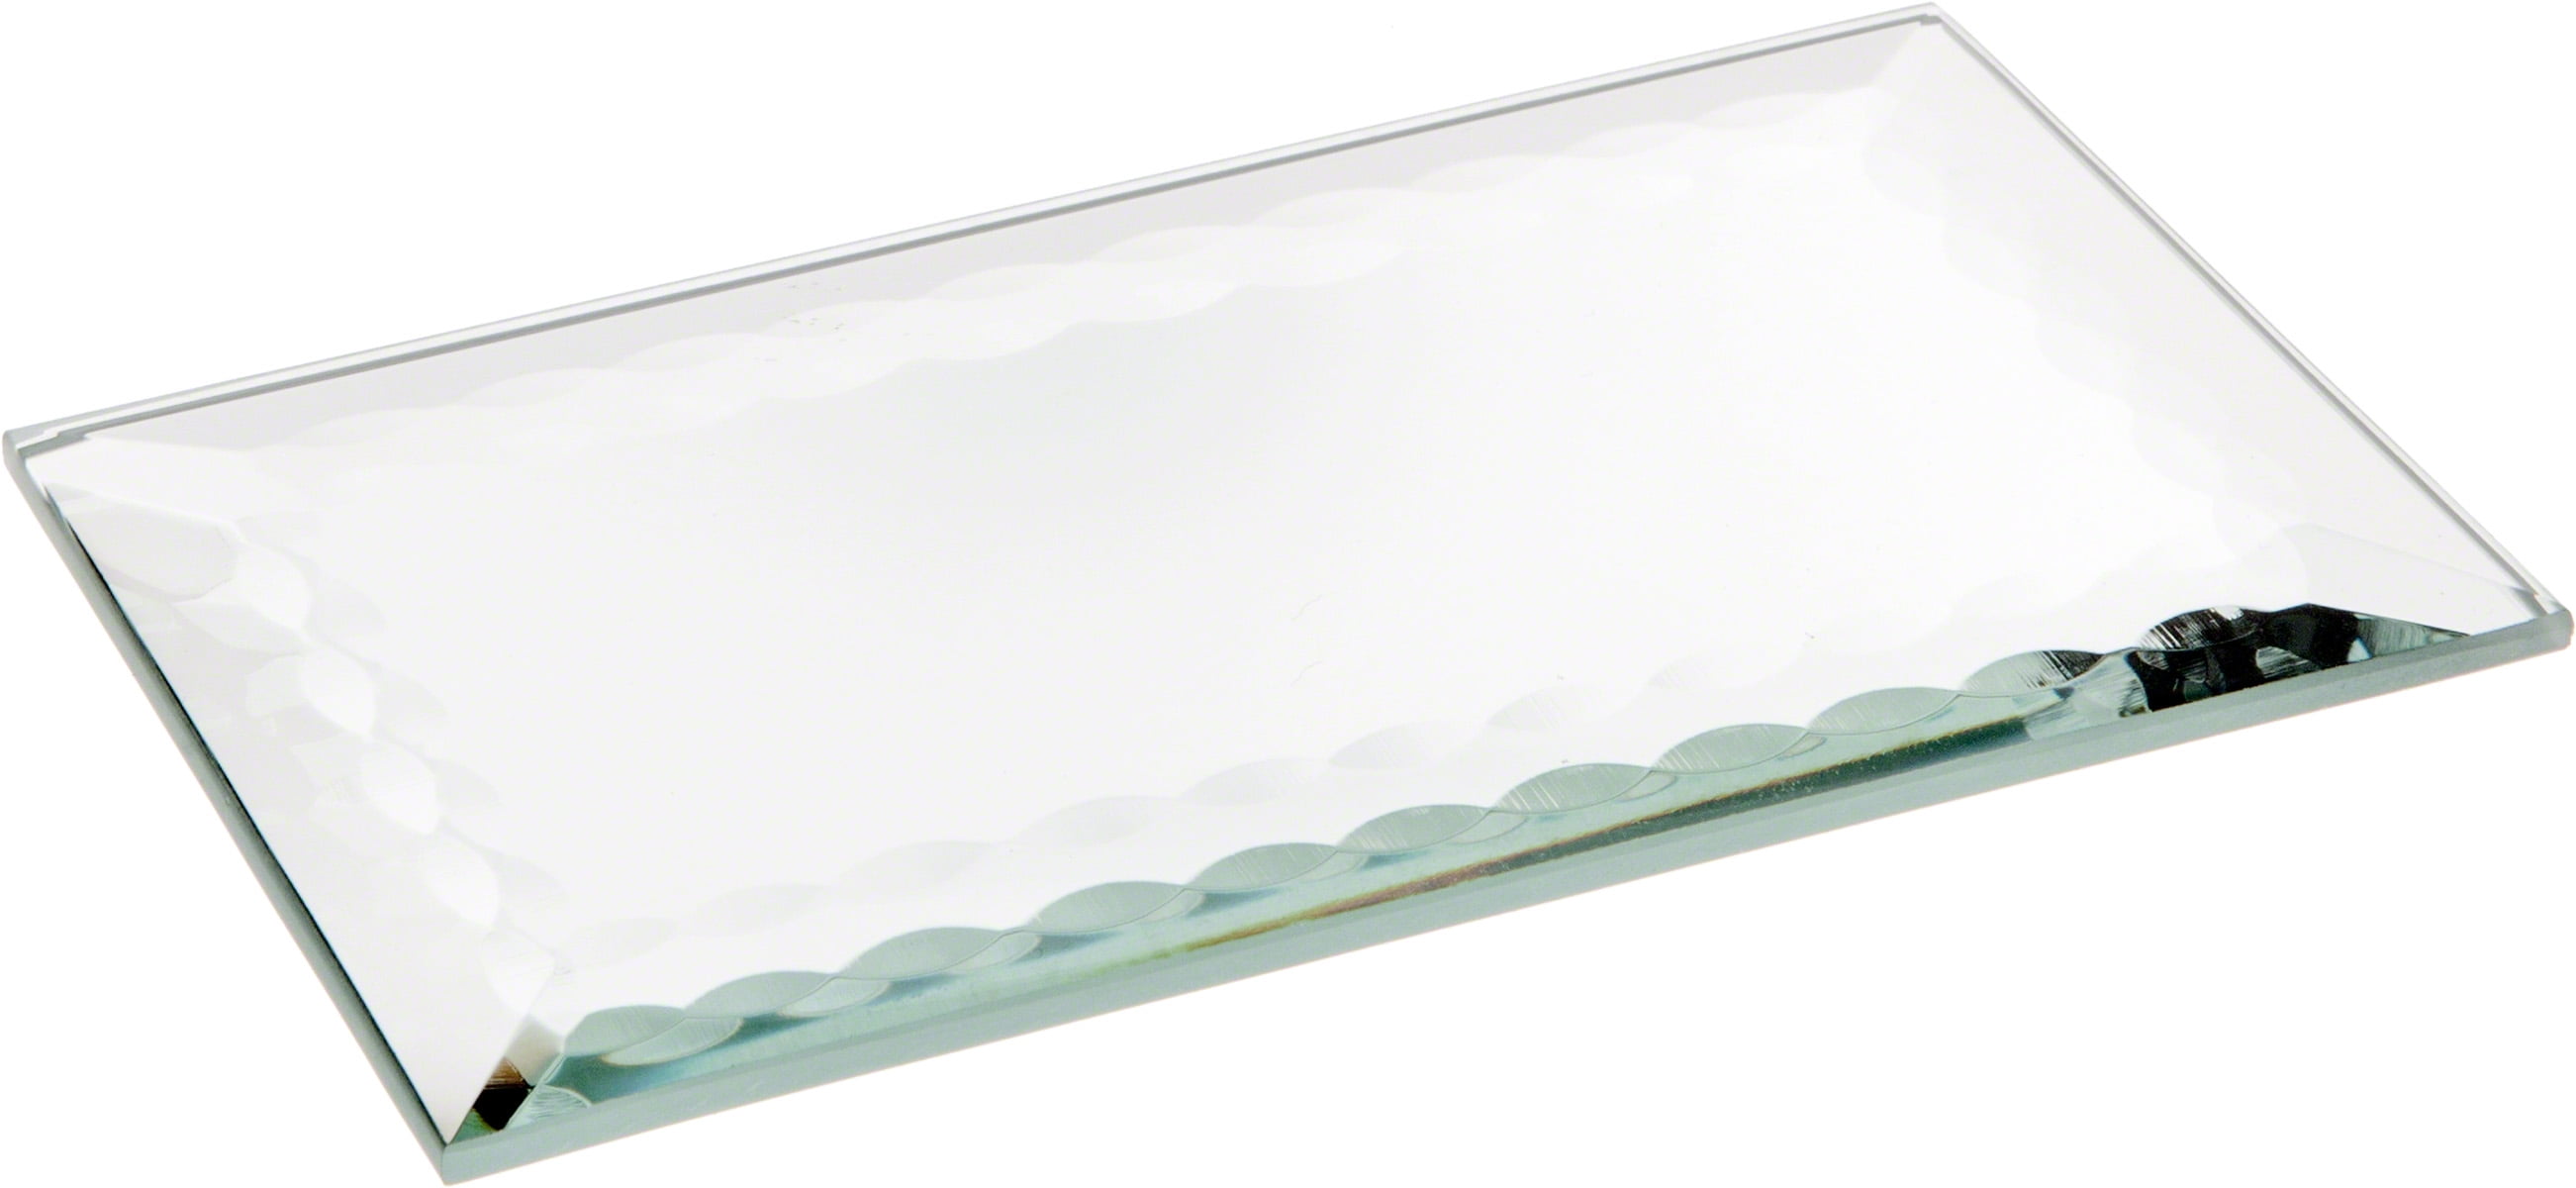 Plymor Rectangle 5mm Beveled Glass Mirror 9 inch x 15 inch 